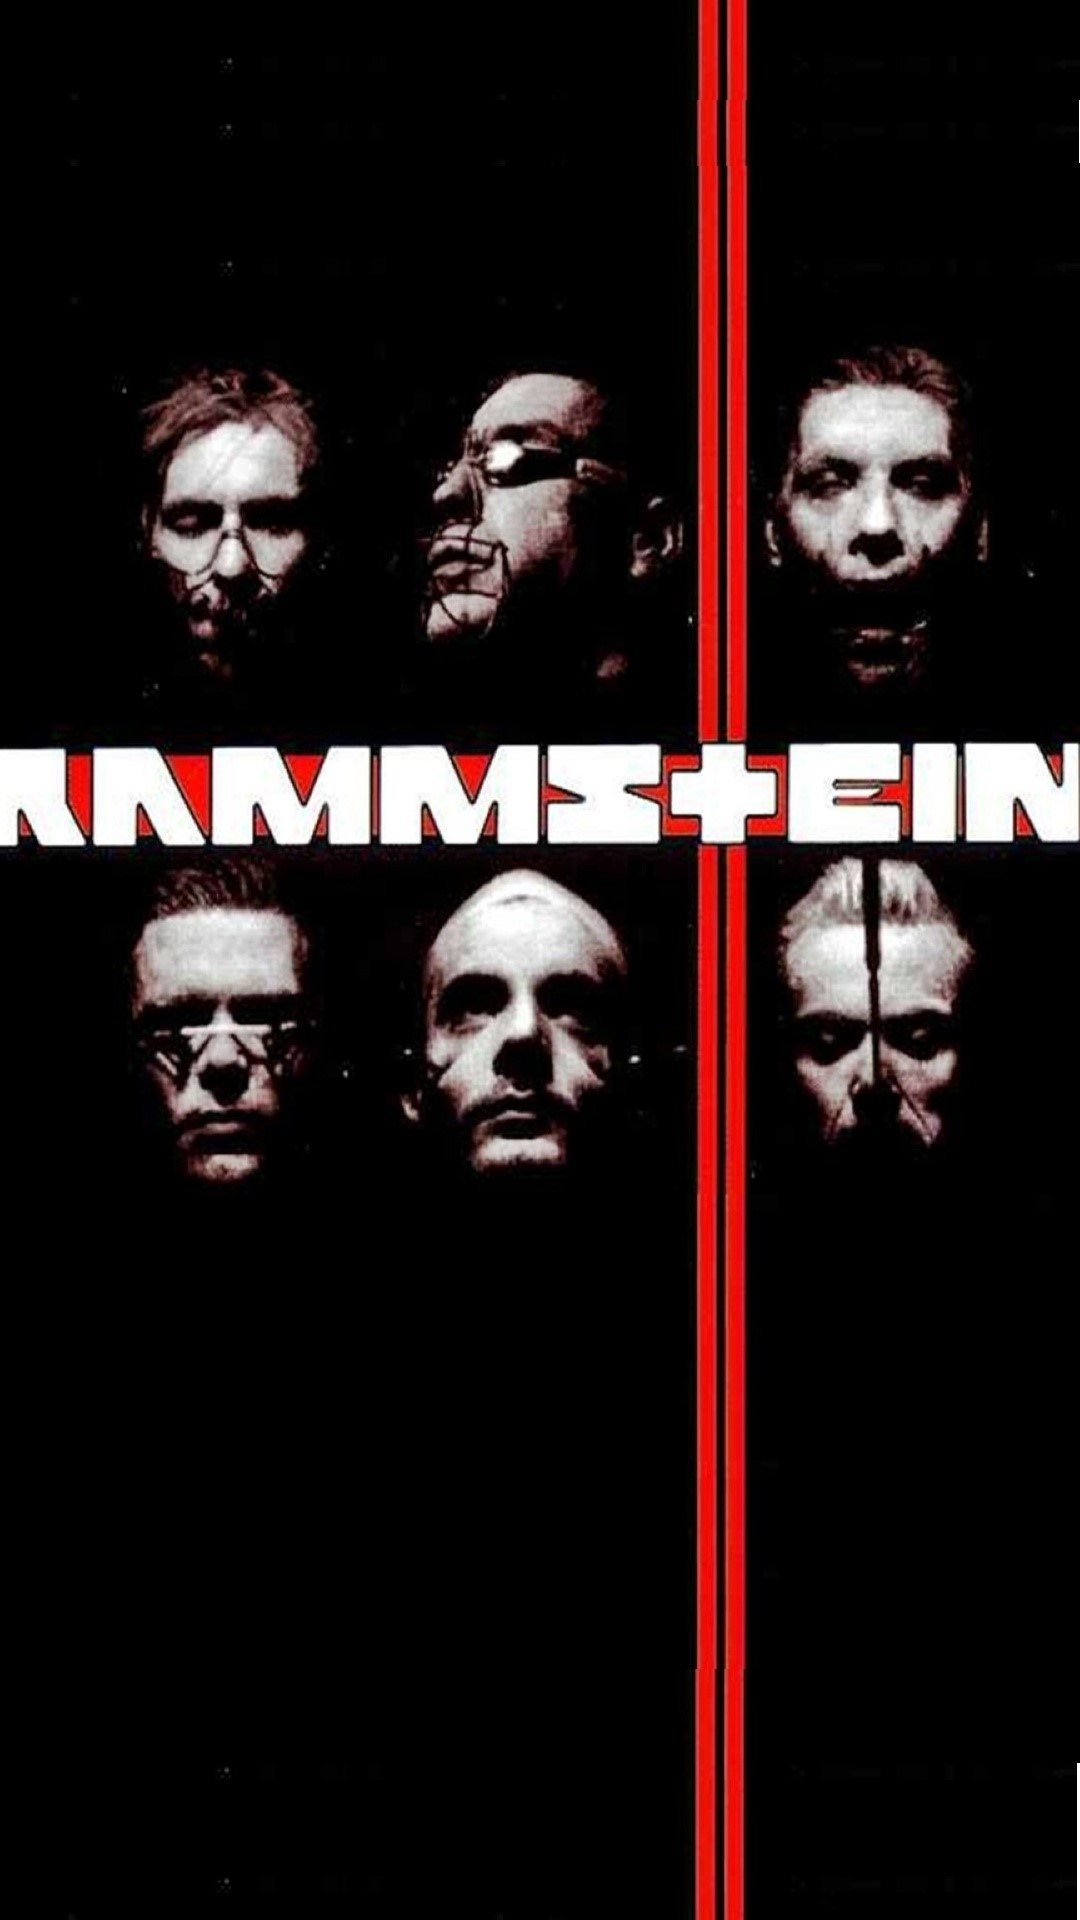 1080x1920 Rammstein Rock Band Android Wallpaper Whatsapp, Android, Iphone